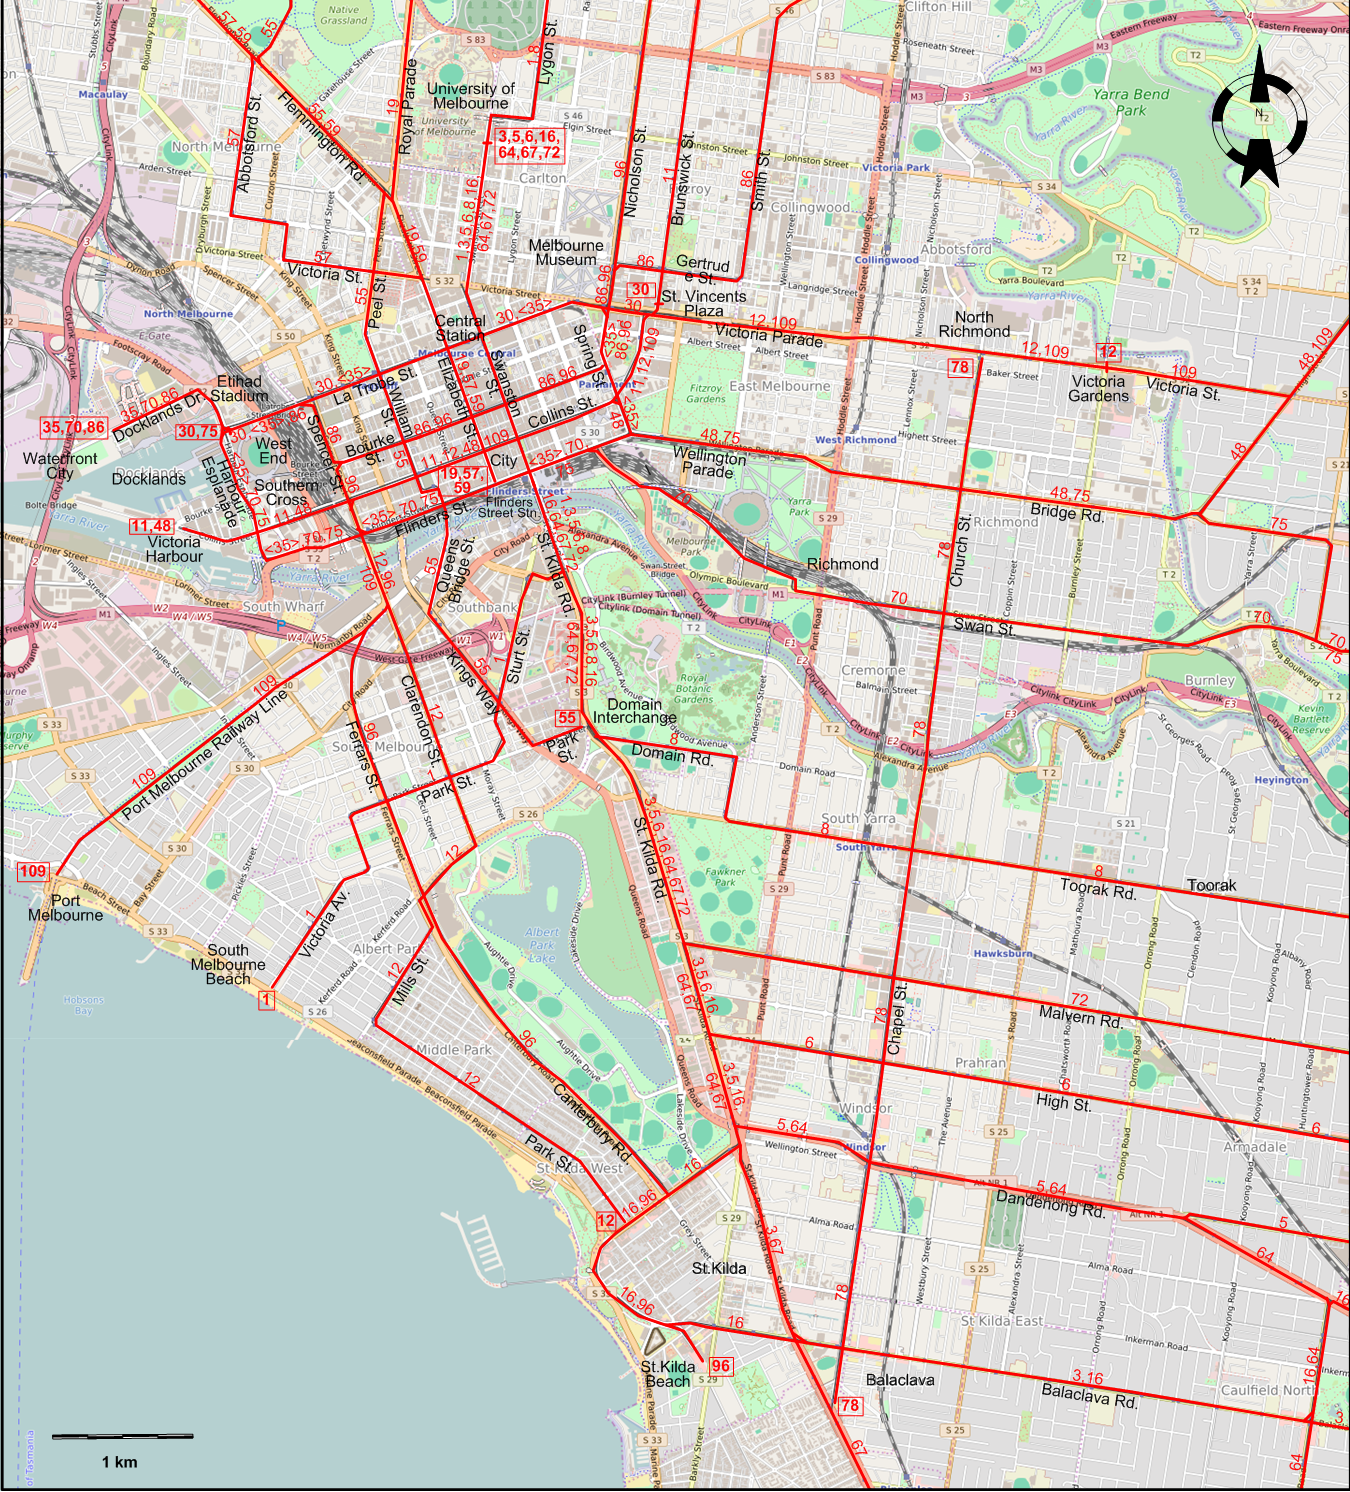 Melbourne-2014 downtown tram map